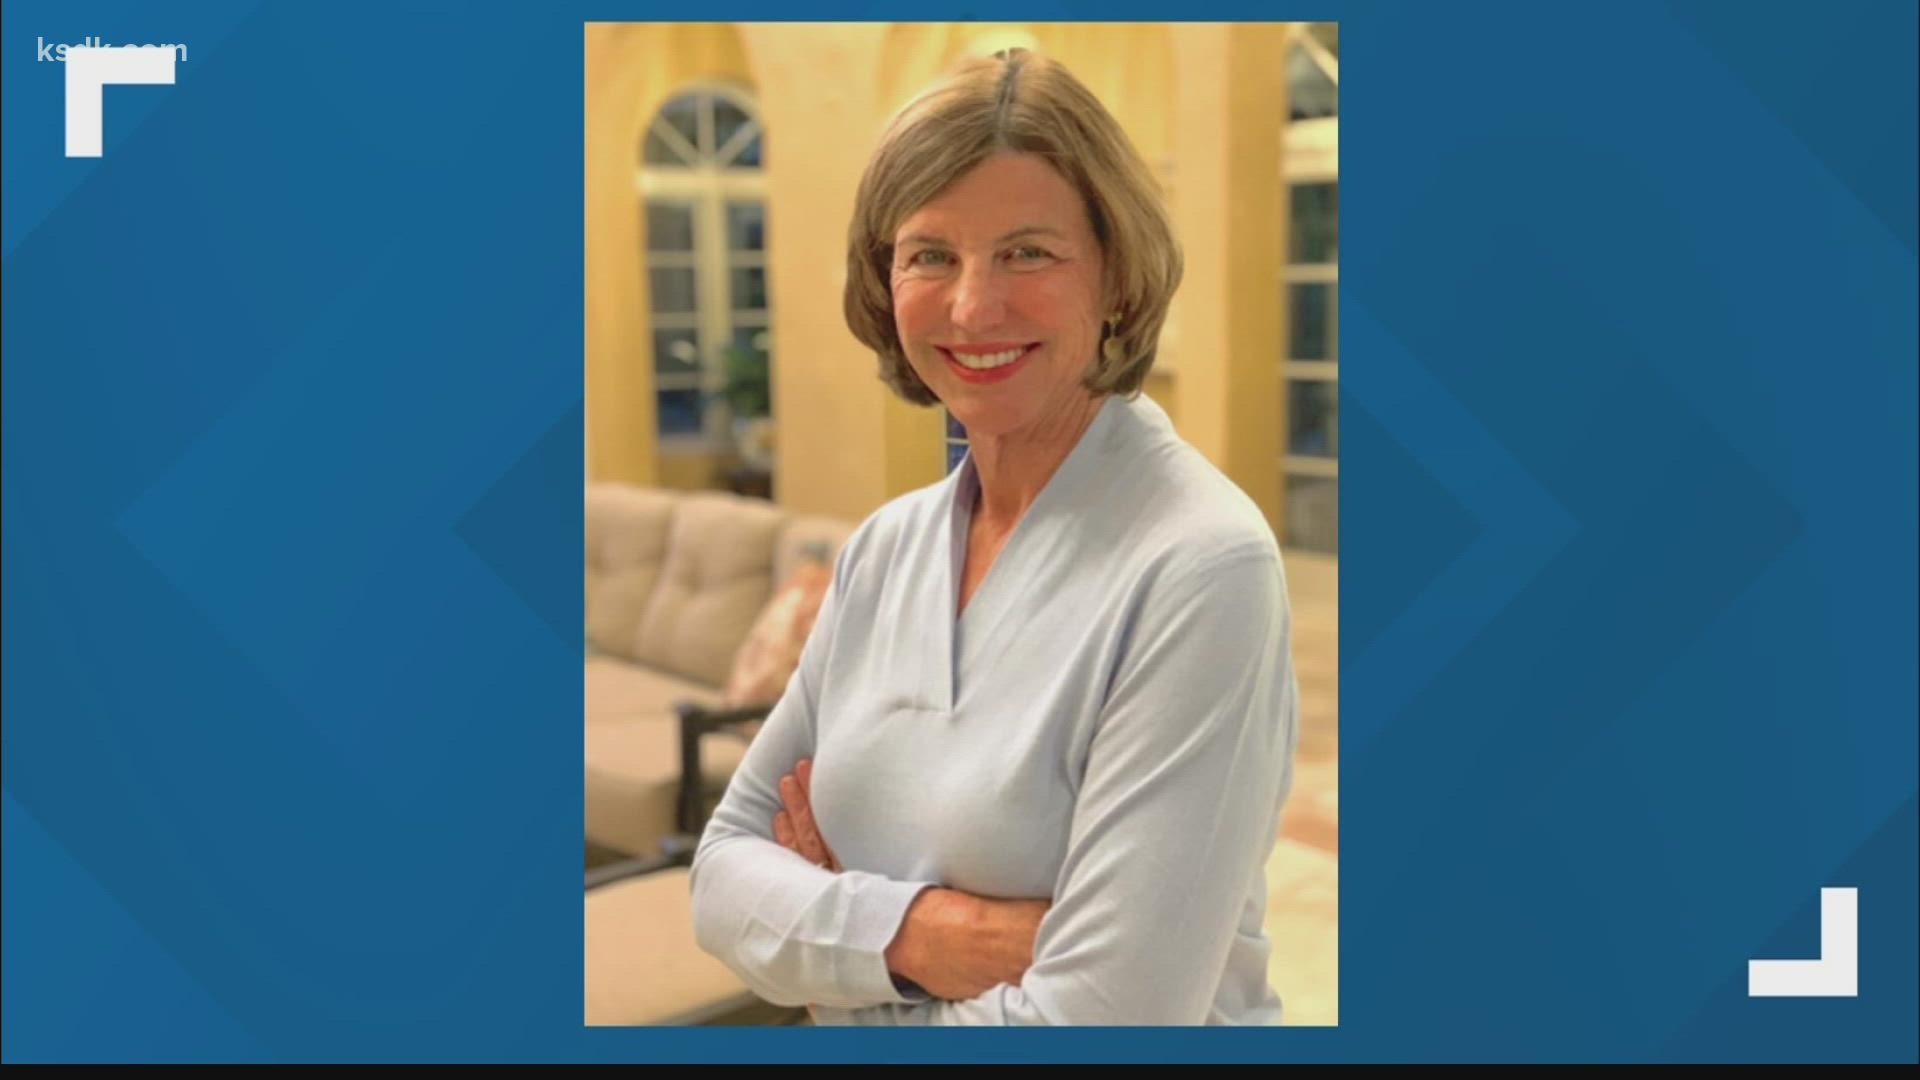 Trudy Busch Valentine, daughter of the late chairman of the Anheuser-Busch Companies, filed Monday to run for U.S. Senate as a Democrat in Missouri.